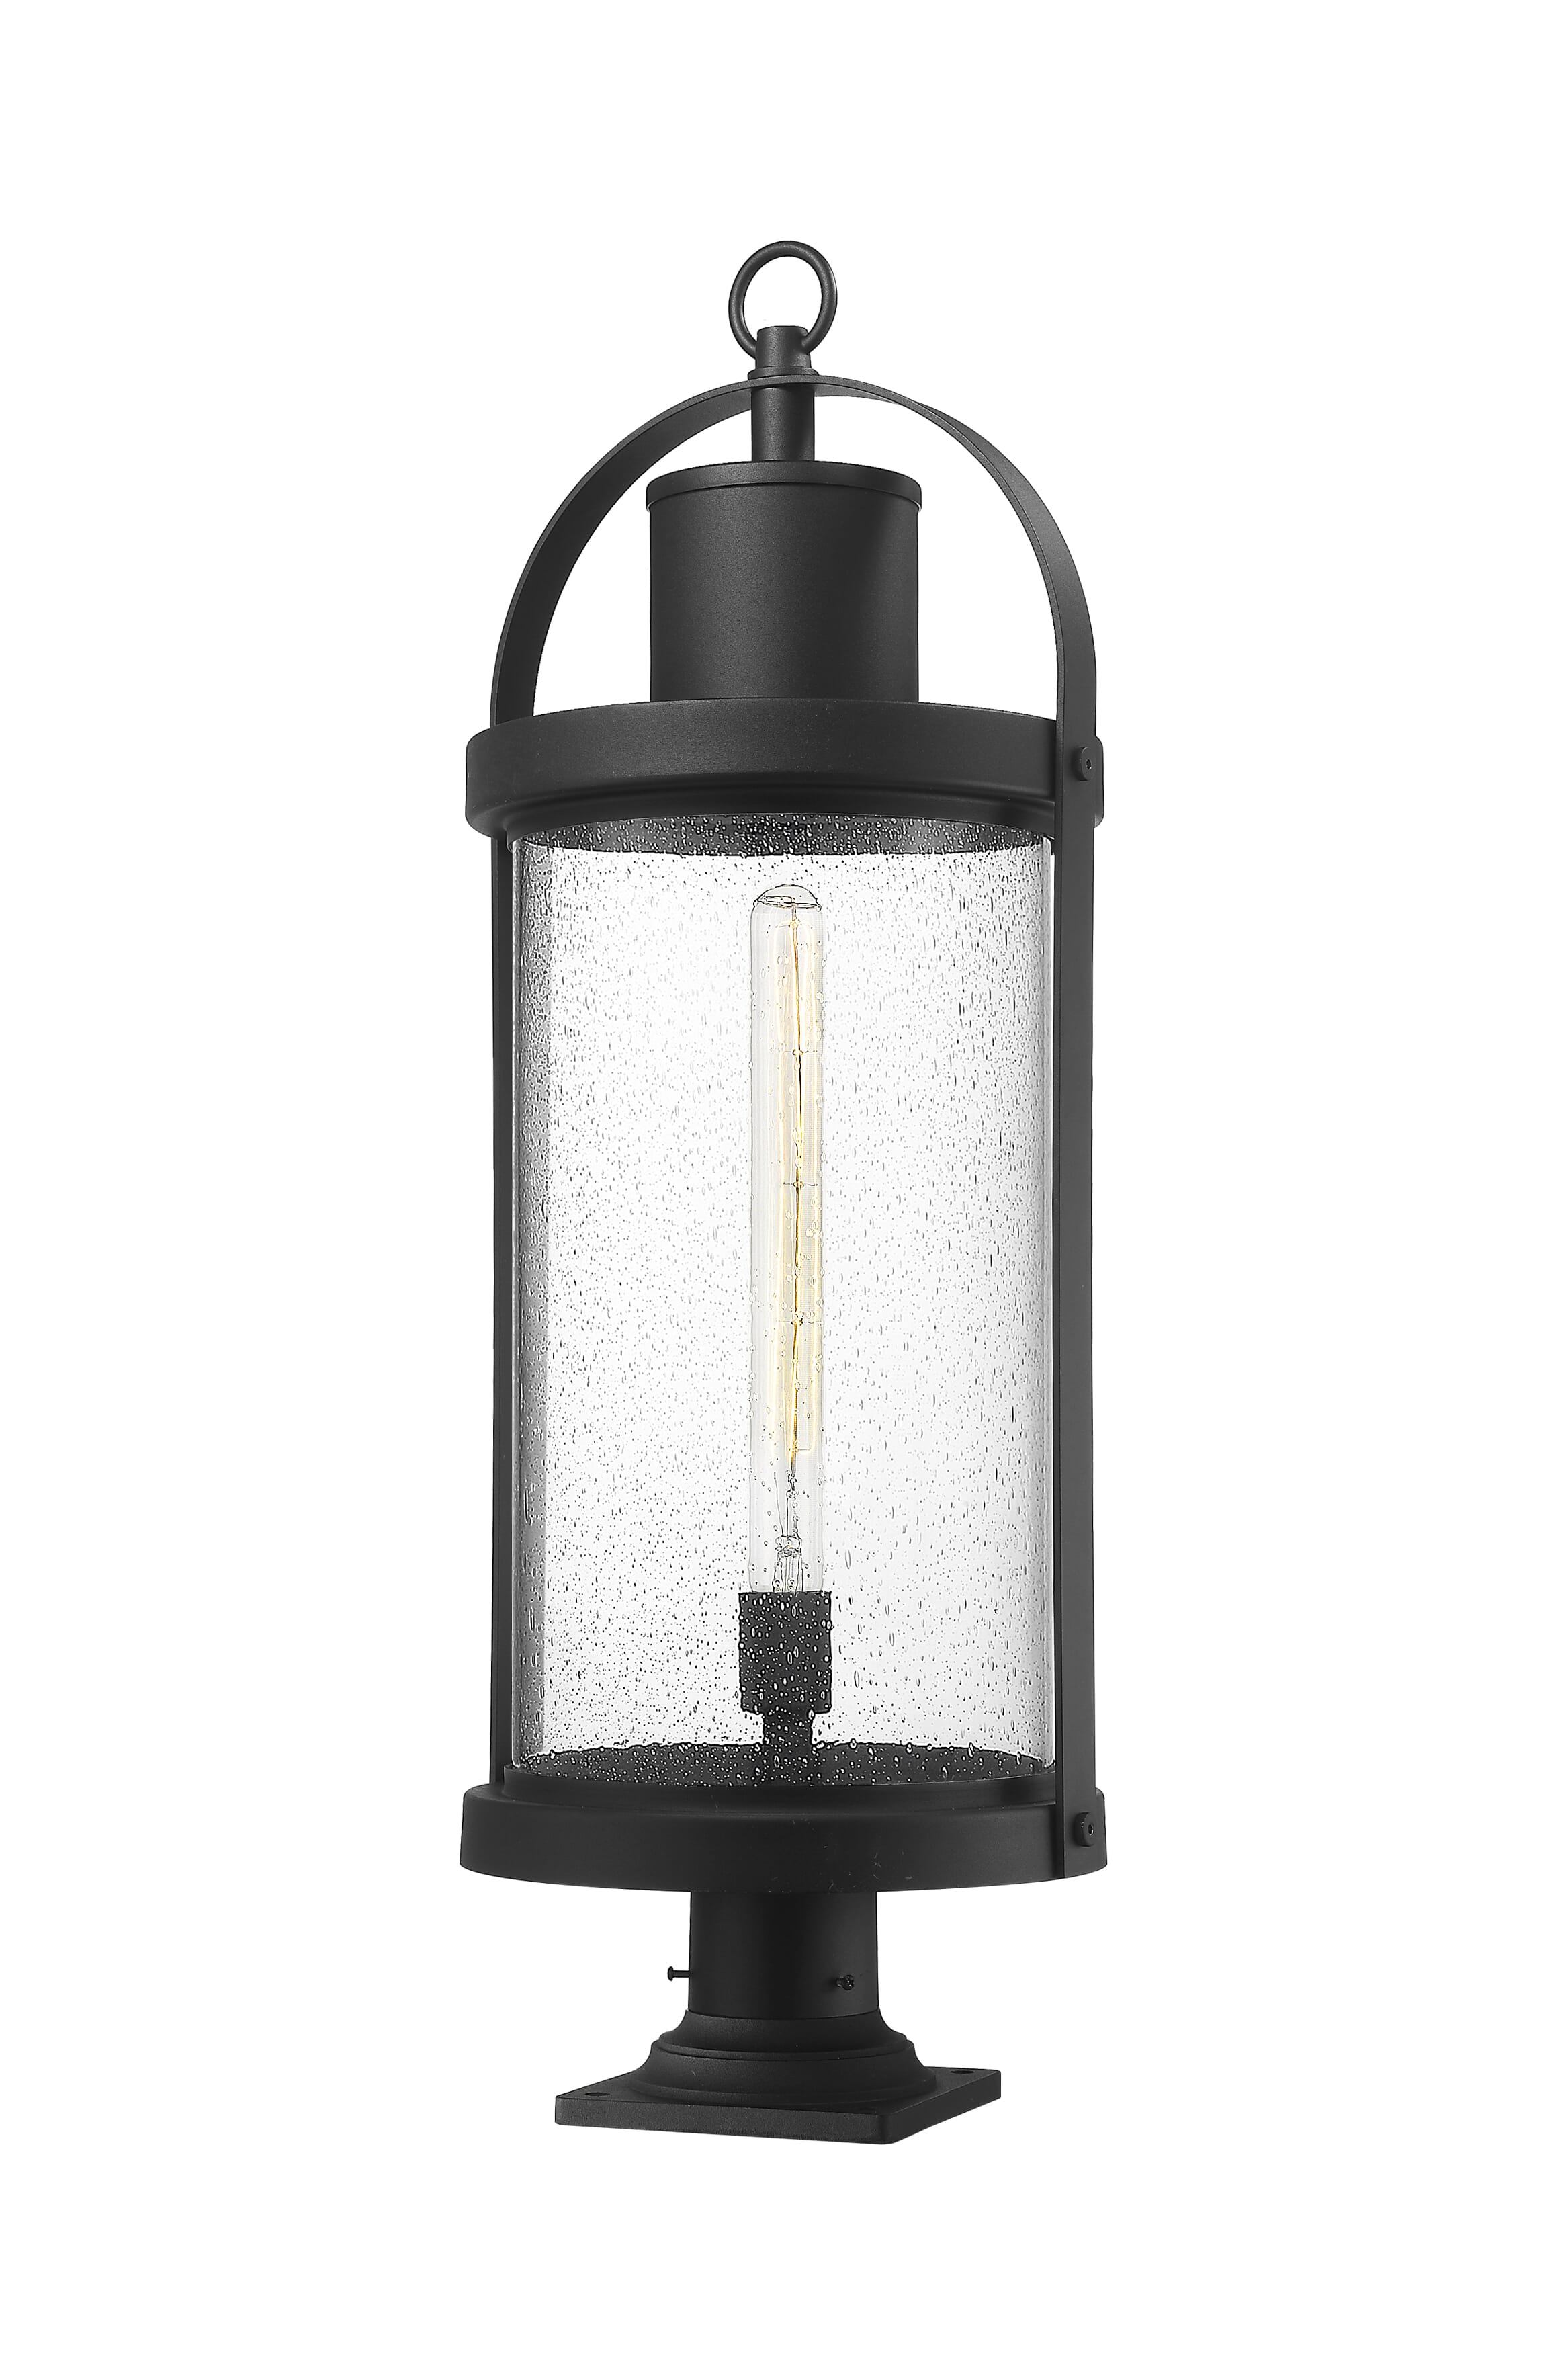 Roundhouse 1-Light Outdoor Pier Mounted Fixture Light In Black